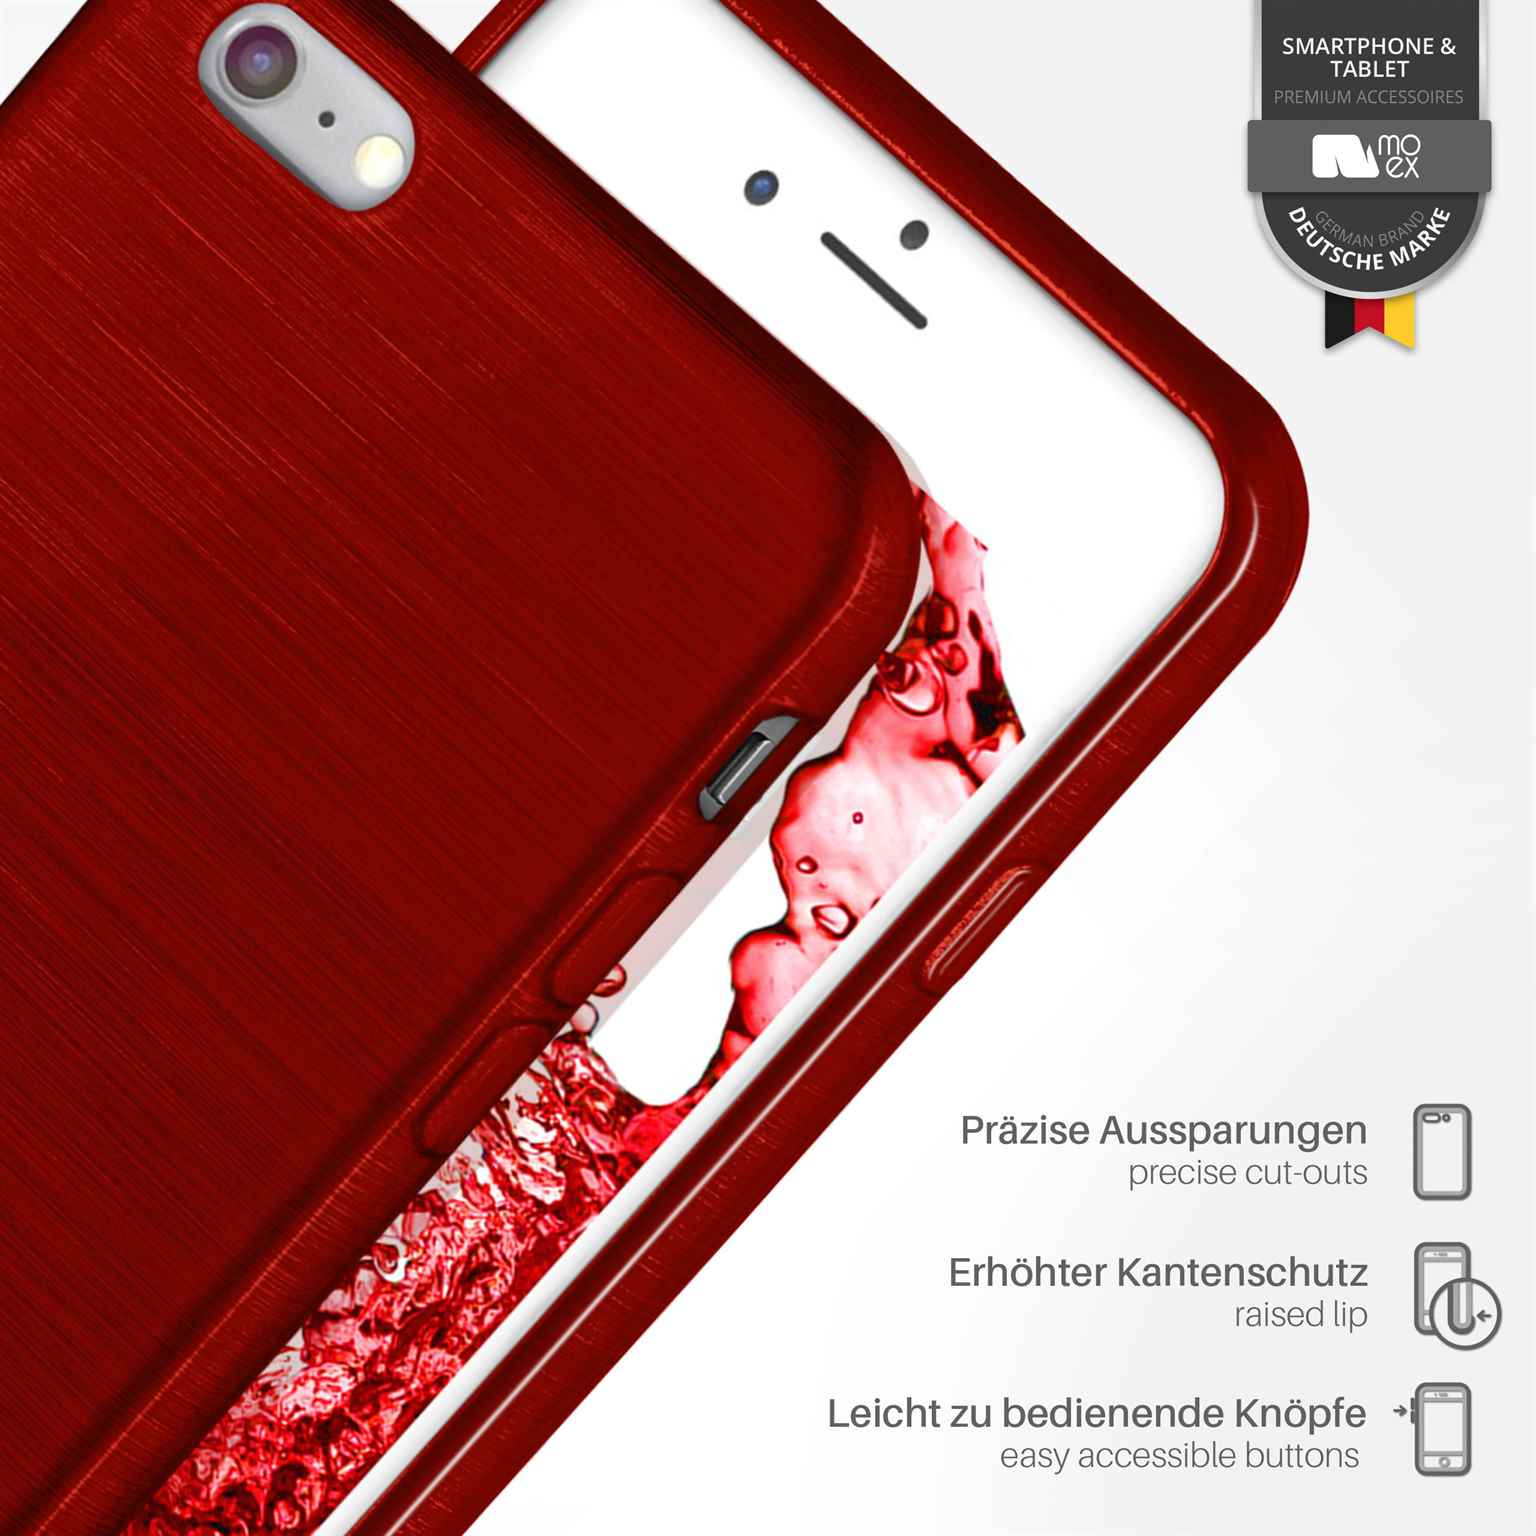 MOEX Brushed Case, Backcover, 6s Plus, Apple, Crimson-Red iPhone